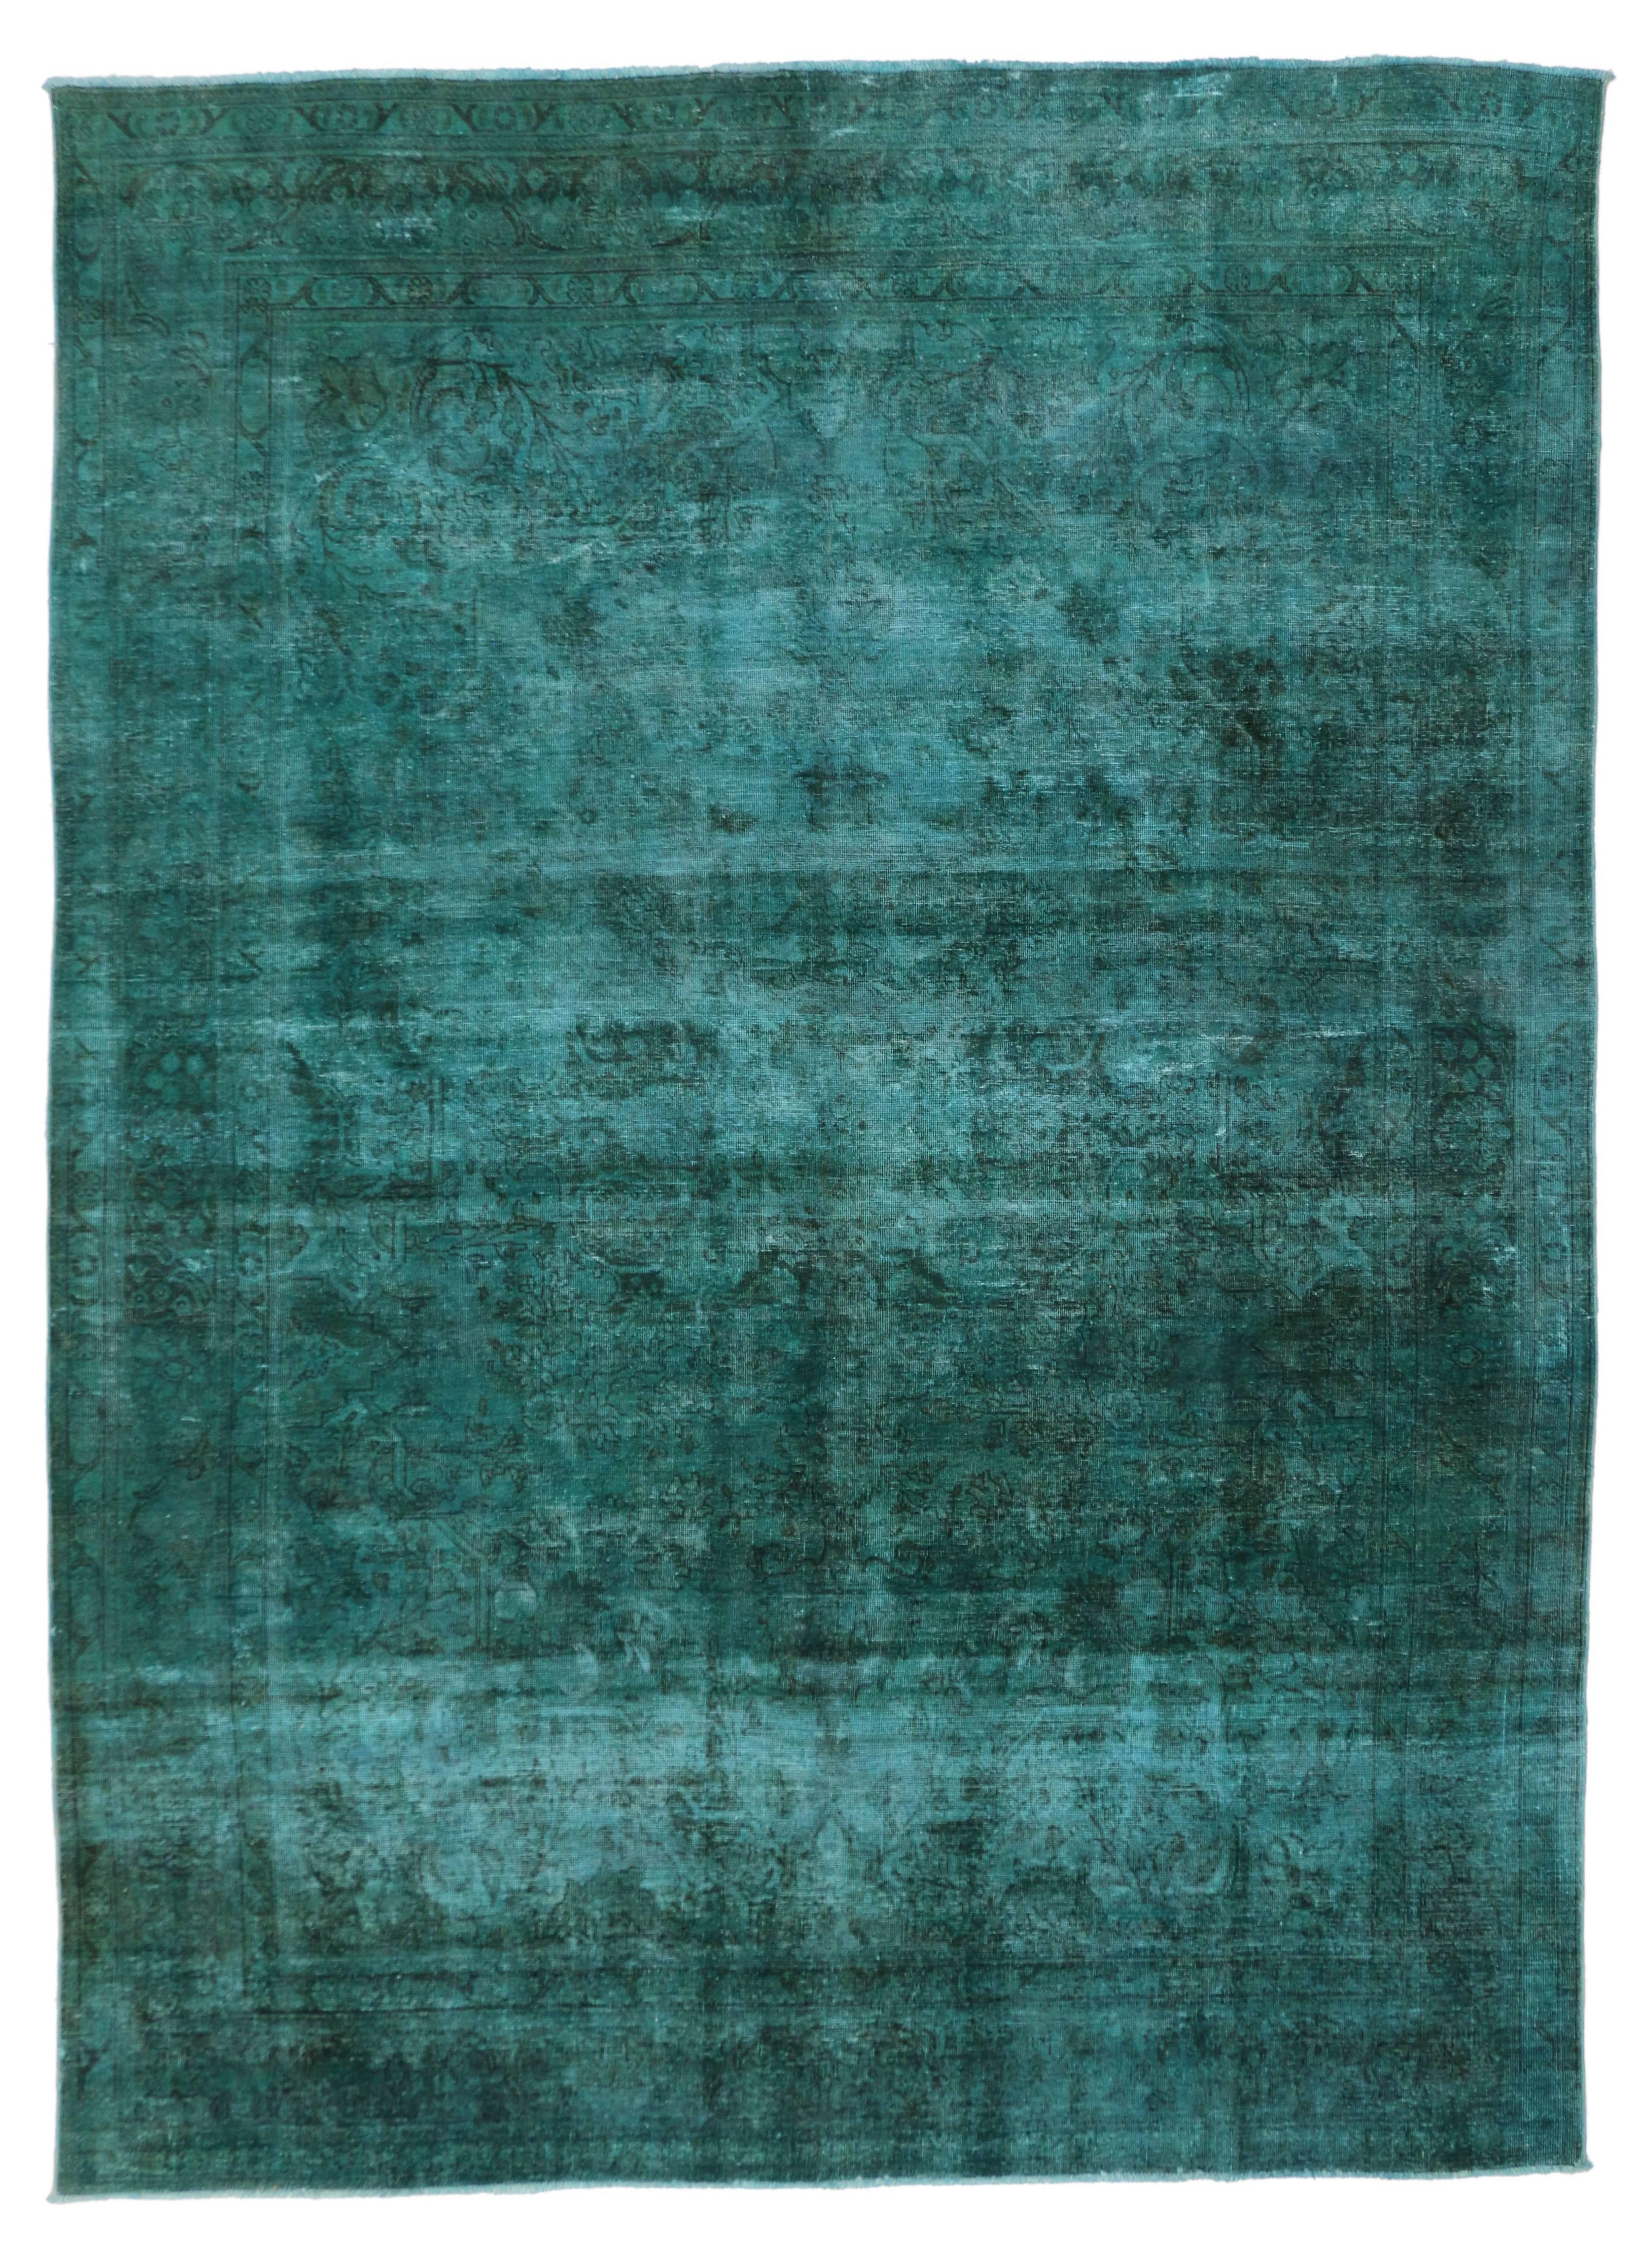 Hand-Knotted Distressed Overdyed Teal Persian Rug with Modern Contemporary Style